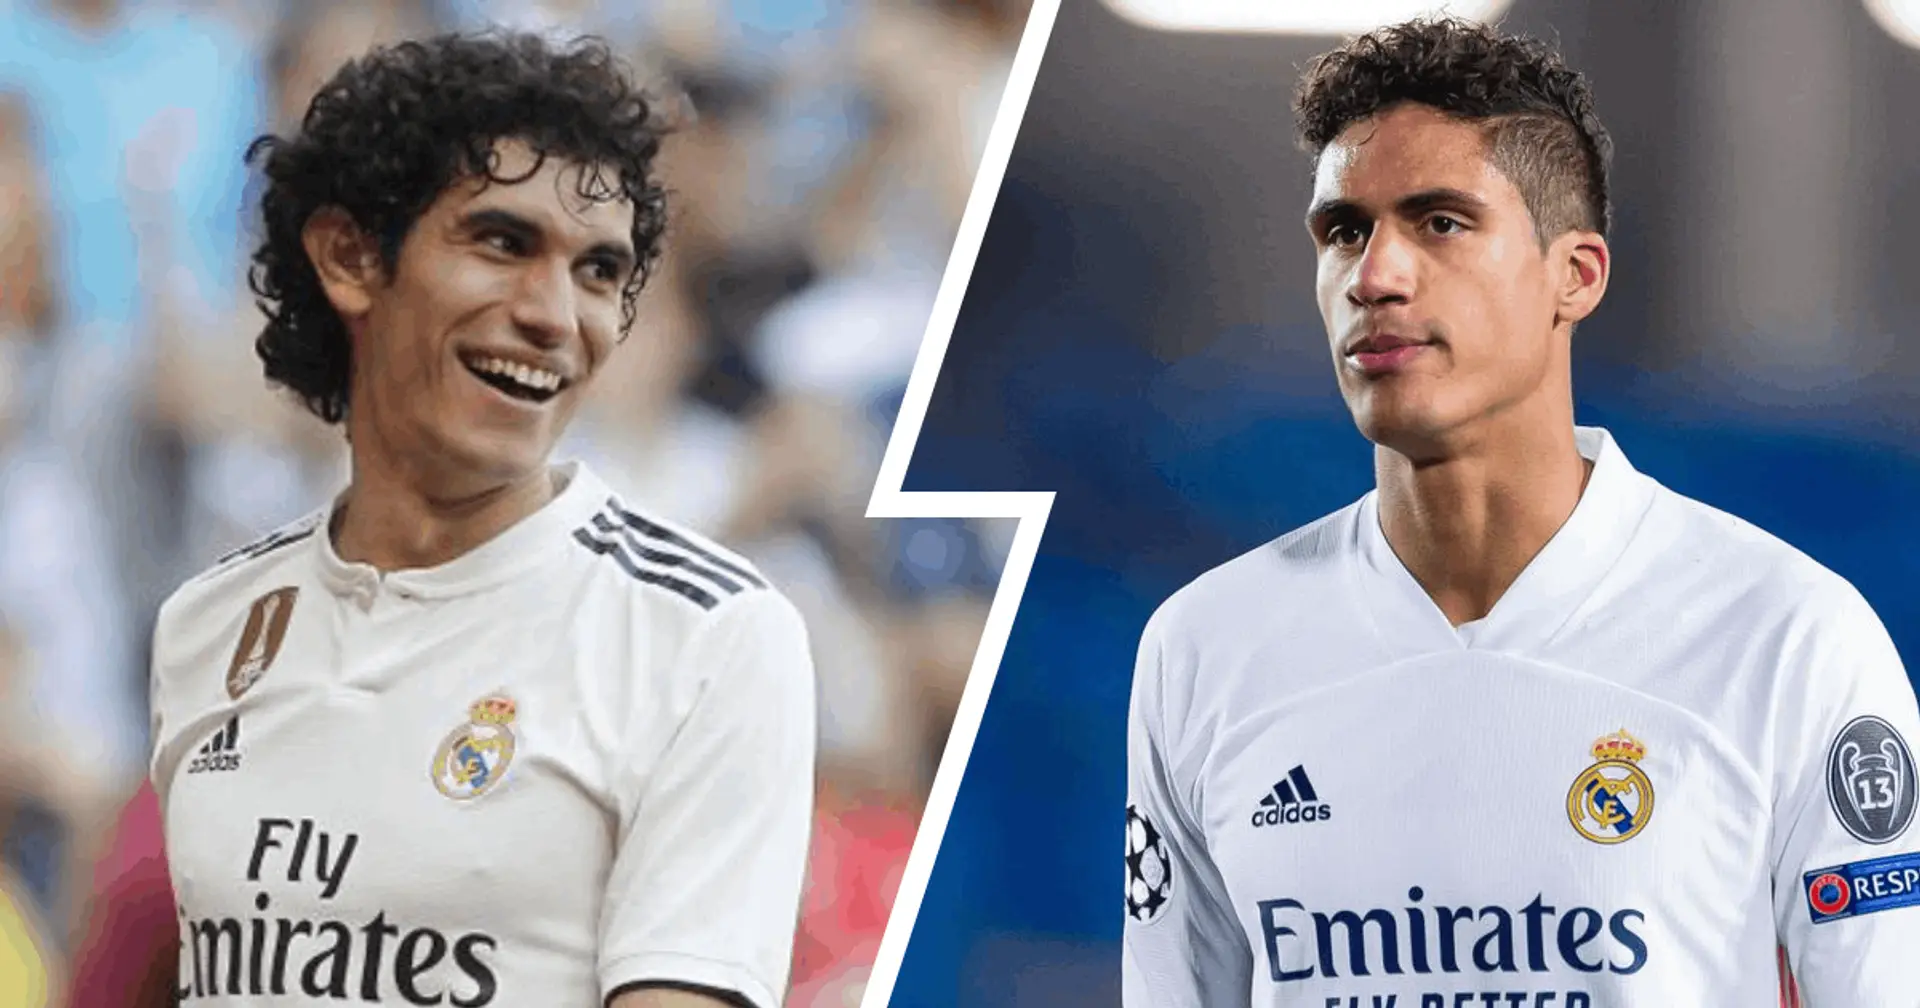 Raphael Varane set to leave Real Madrid, Jesus Vallejo could be fourth centre-back next season (reliability: 5 stars)